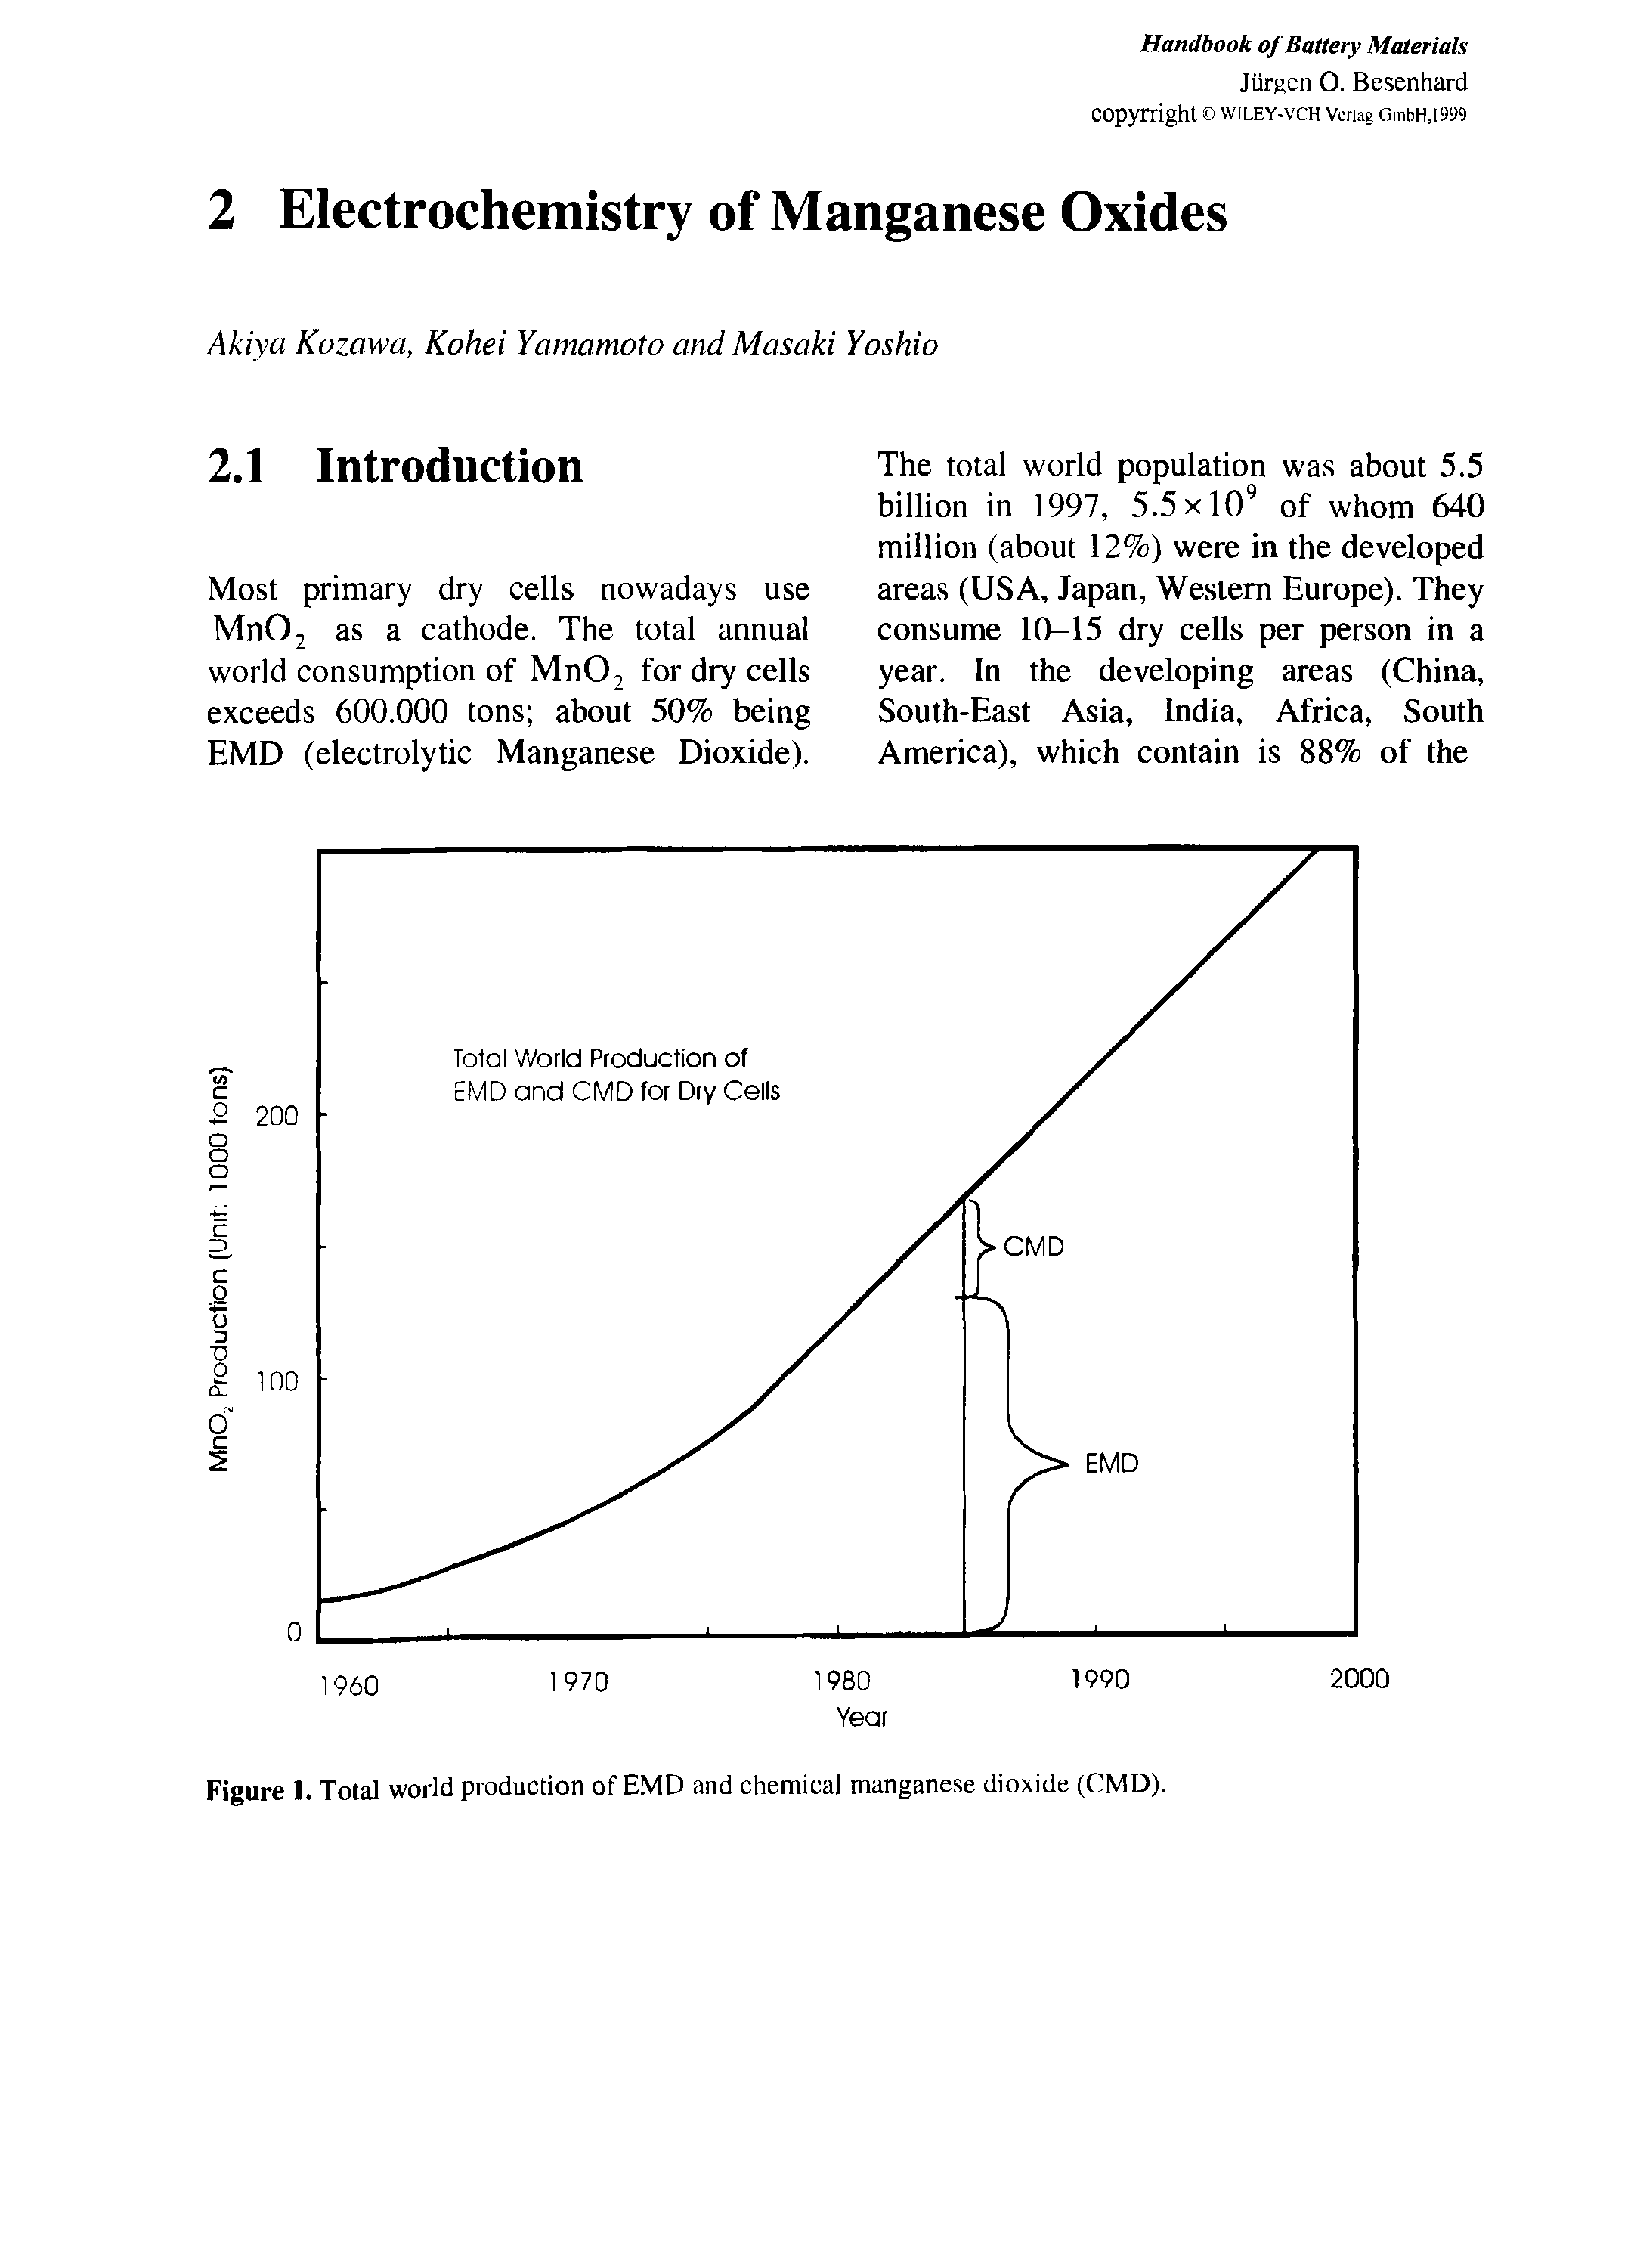 Figure 1. Total world production of EMD and chemical manganese dioxide (CMD).